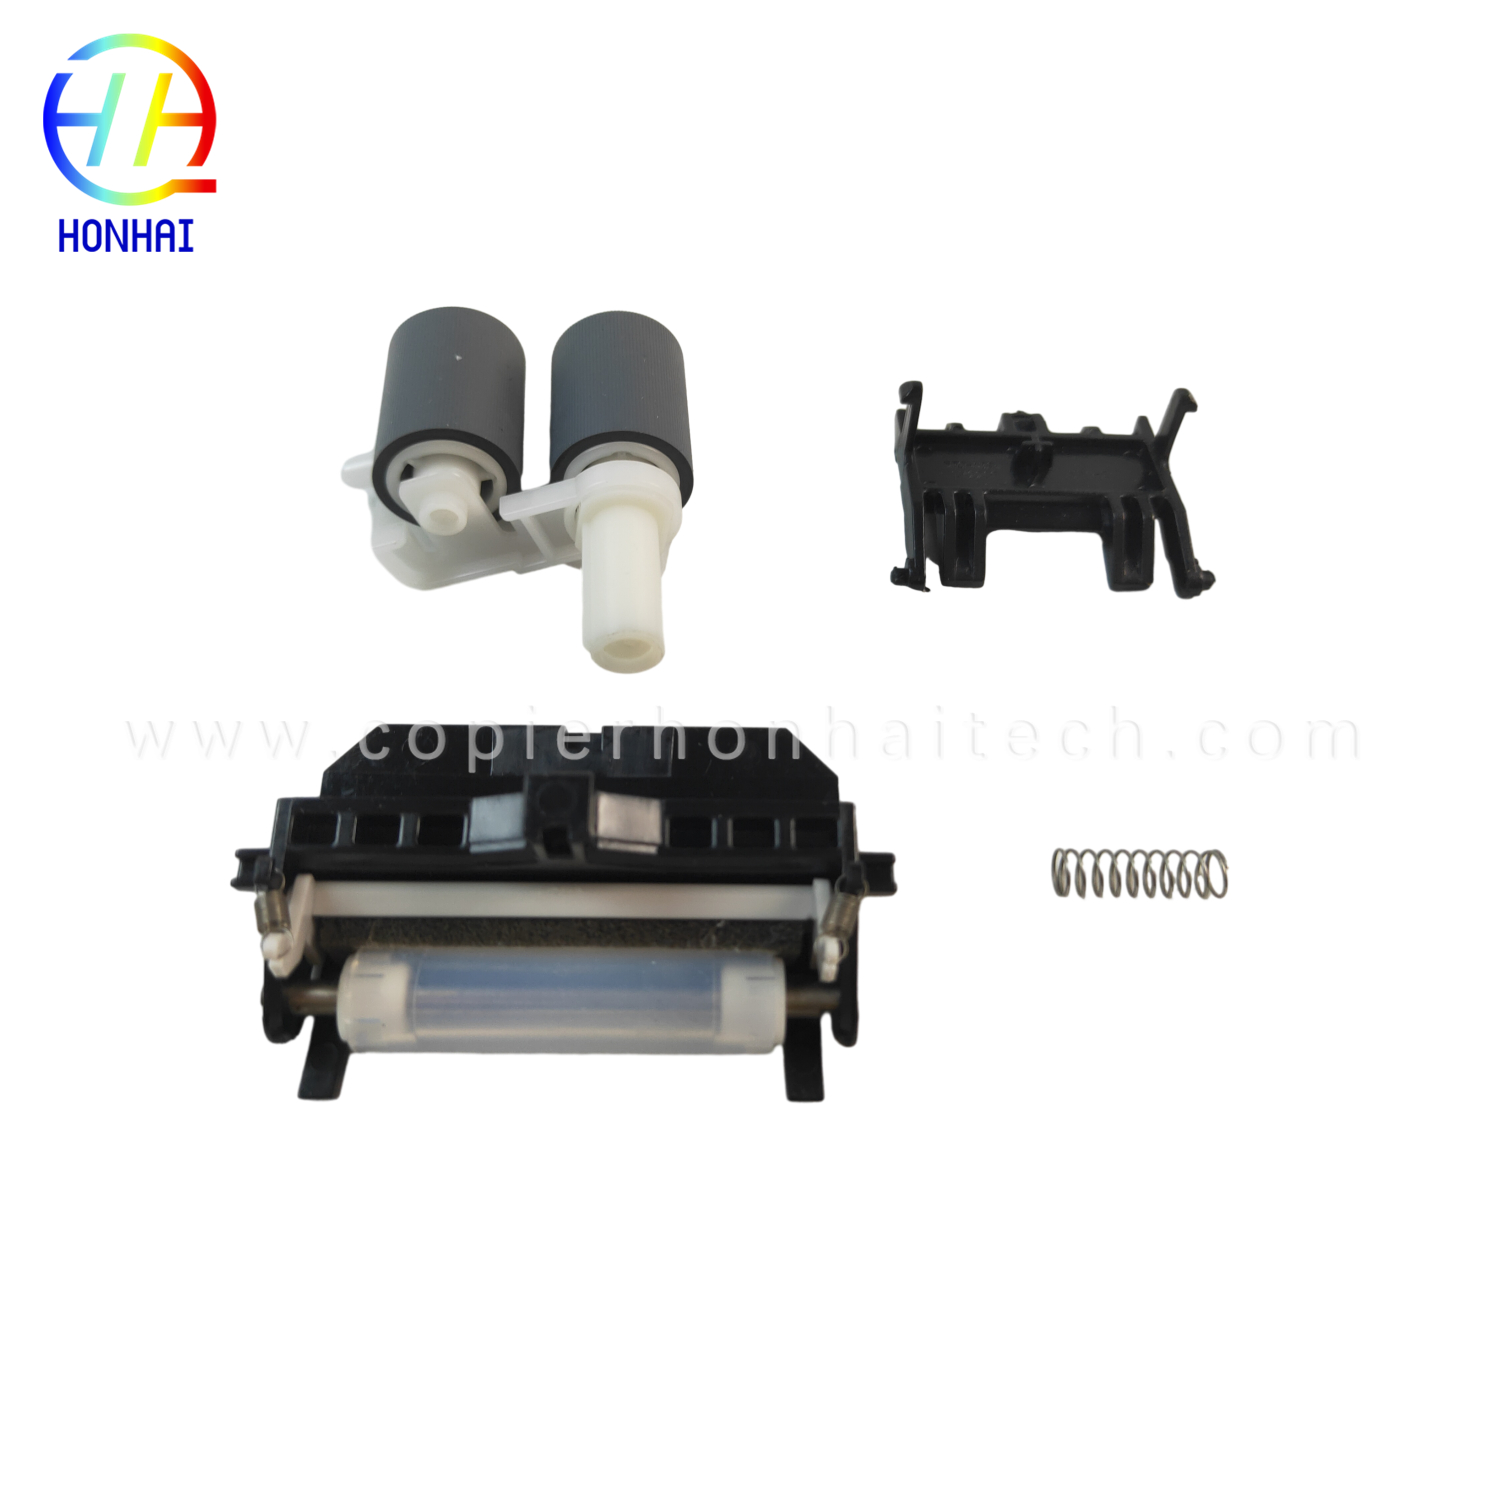 https://www.copierhonhaitech.com/pickup-feed-assemble-and-separation-pad-kit-for-brother-dcp-l2540dw-product/